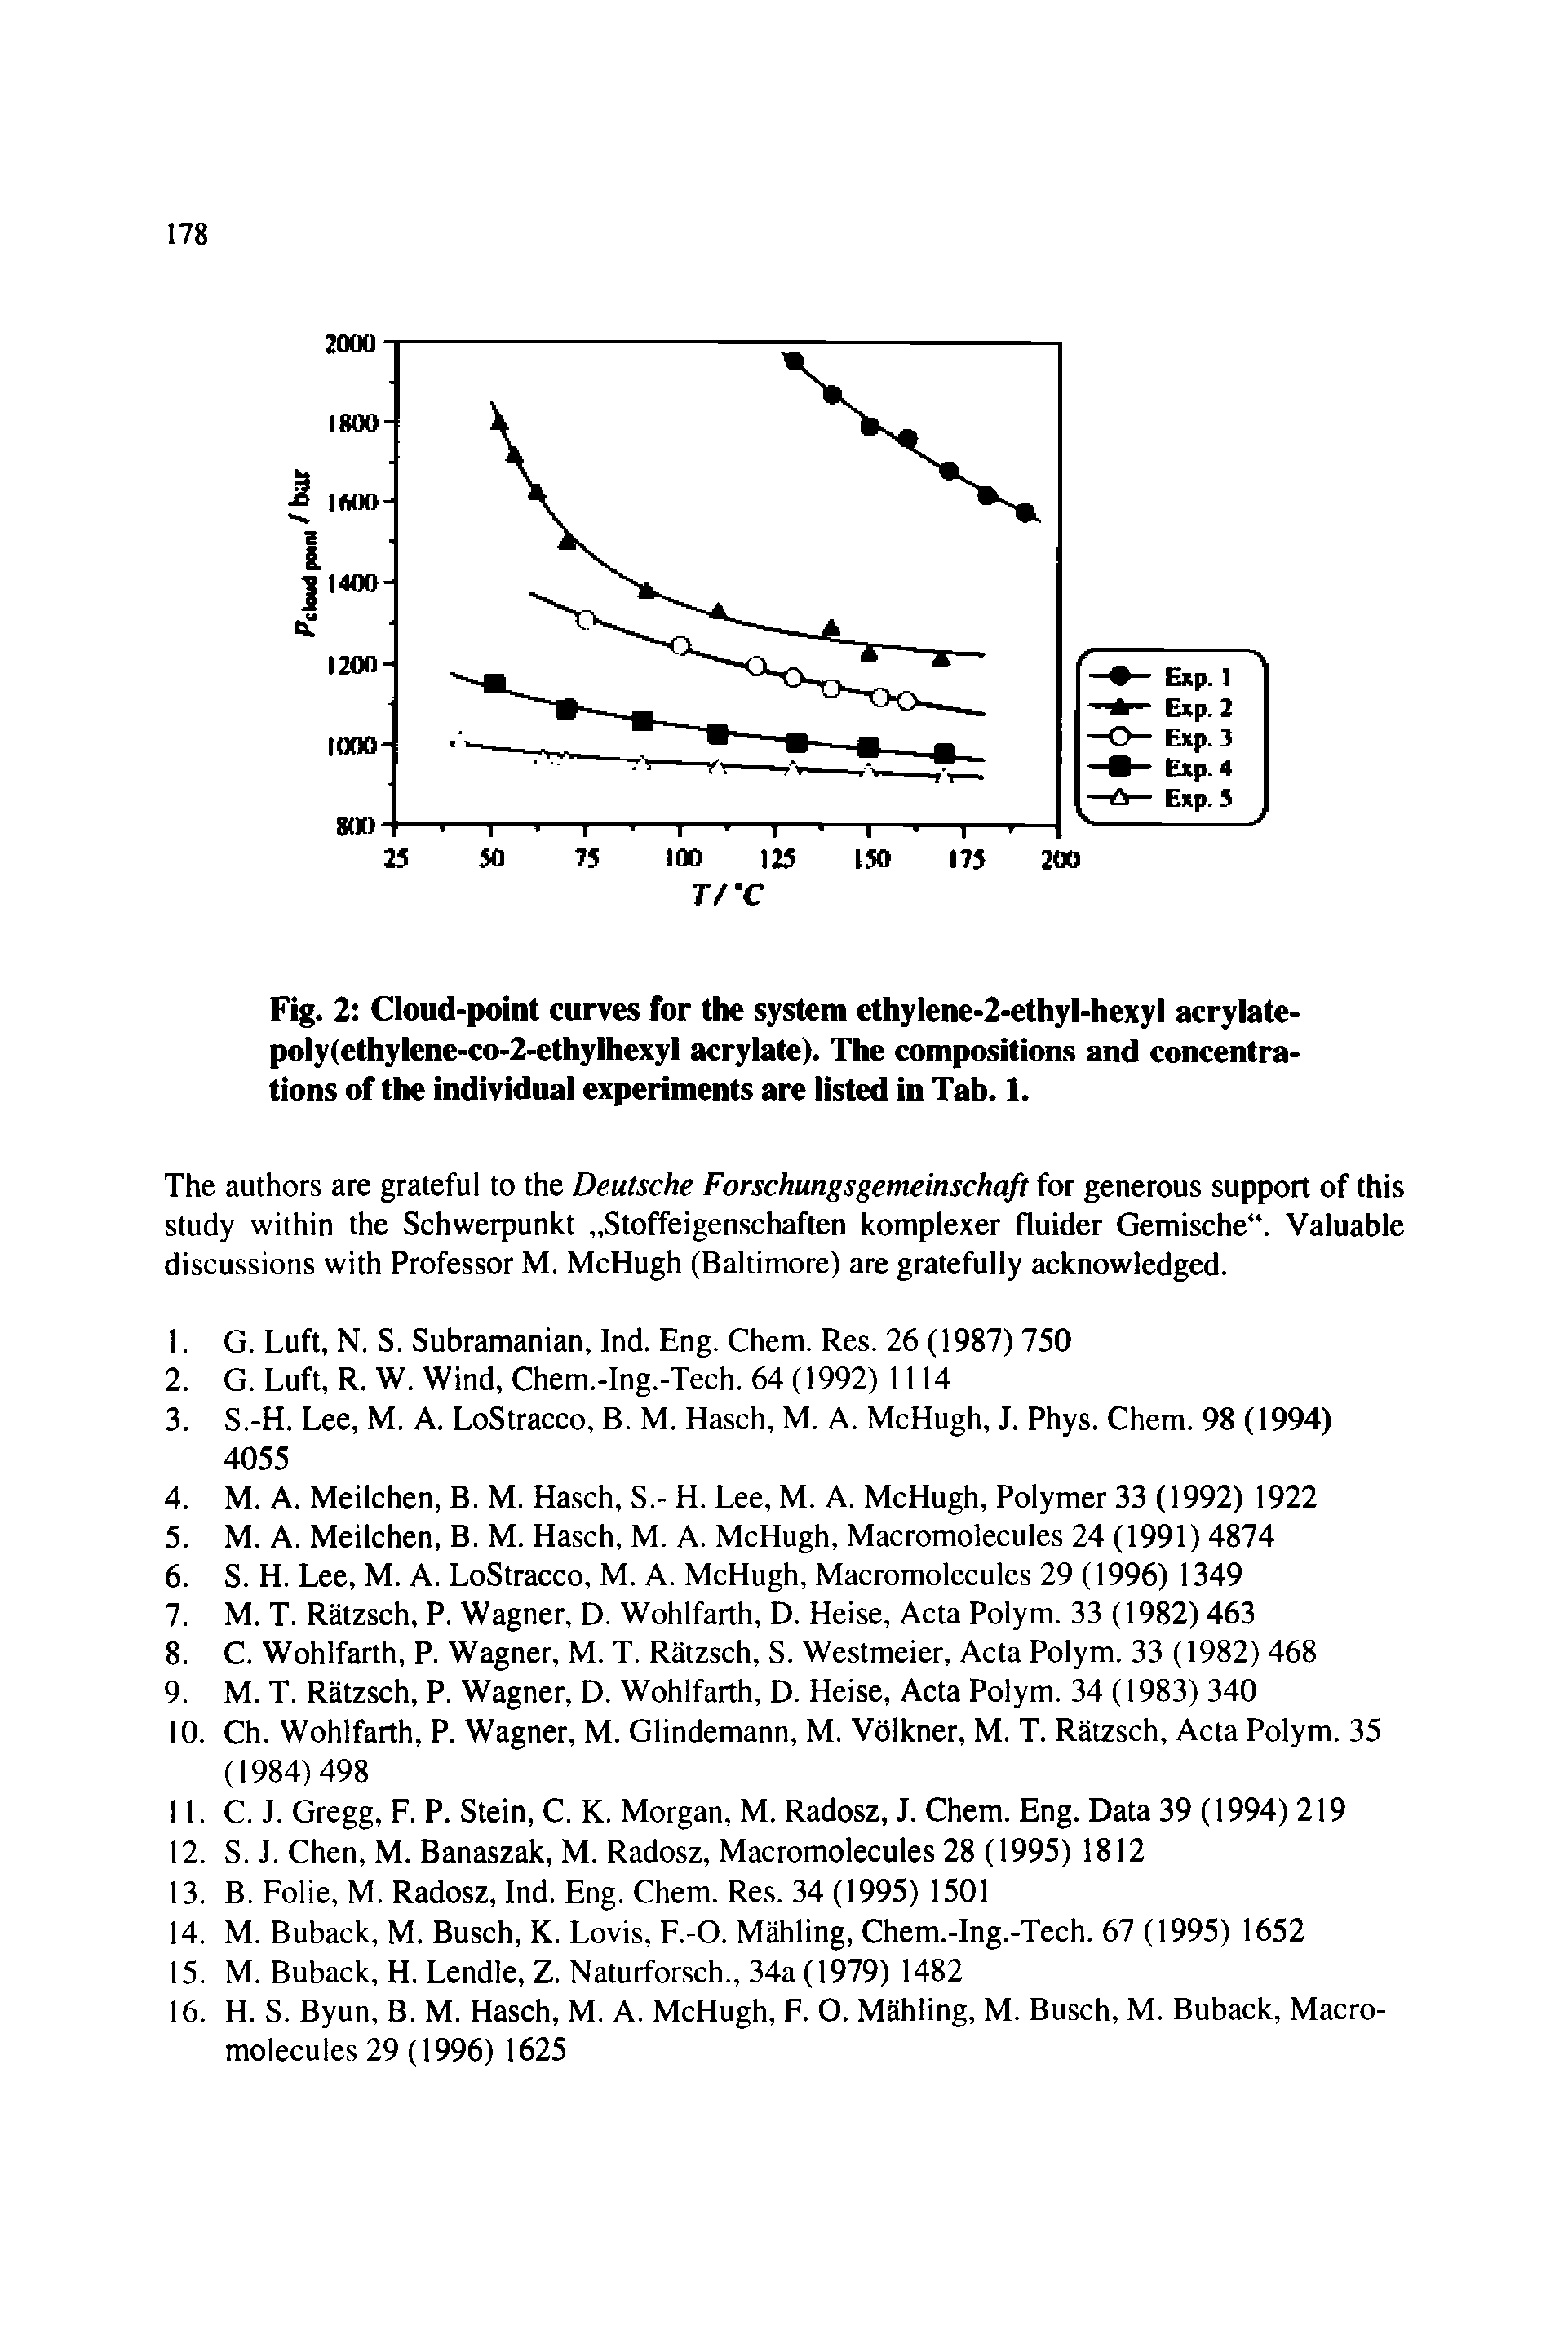 Fig. 2 Cloud-point curves for the system ethylene-2-ethyl-hexyl acrylate-poly(ethylene-co-2-ethy hexyI acrylate). The compositions and concentrations of the individual experiments are listed in Tab. 1.